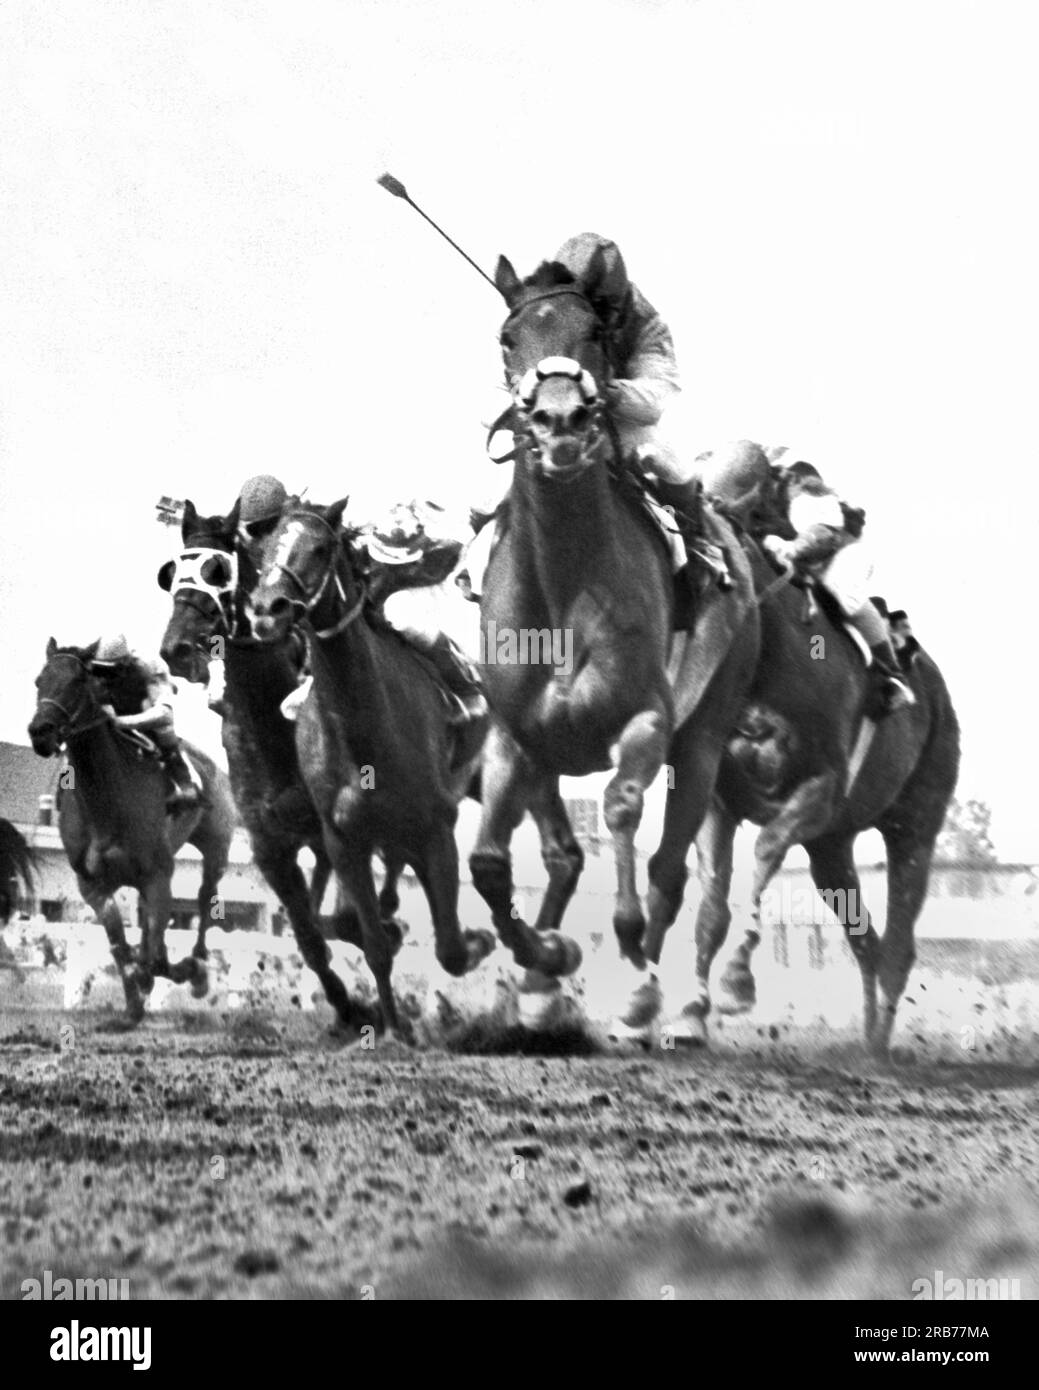 Spokane, Washington:  August 27, 1973 Revel Step with jockey Jerry Tokata hits the wire first in the second race at Playfair Commerce Park. Stock Photo